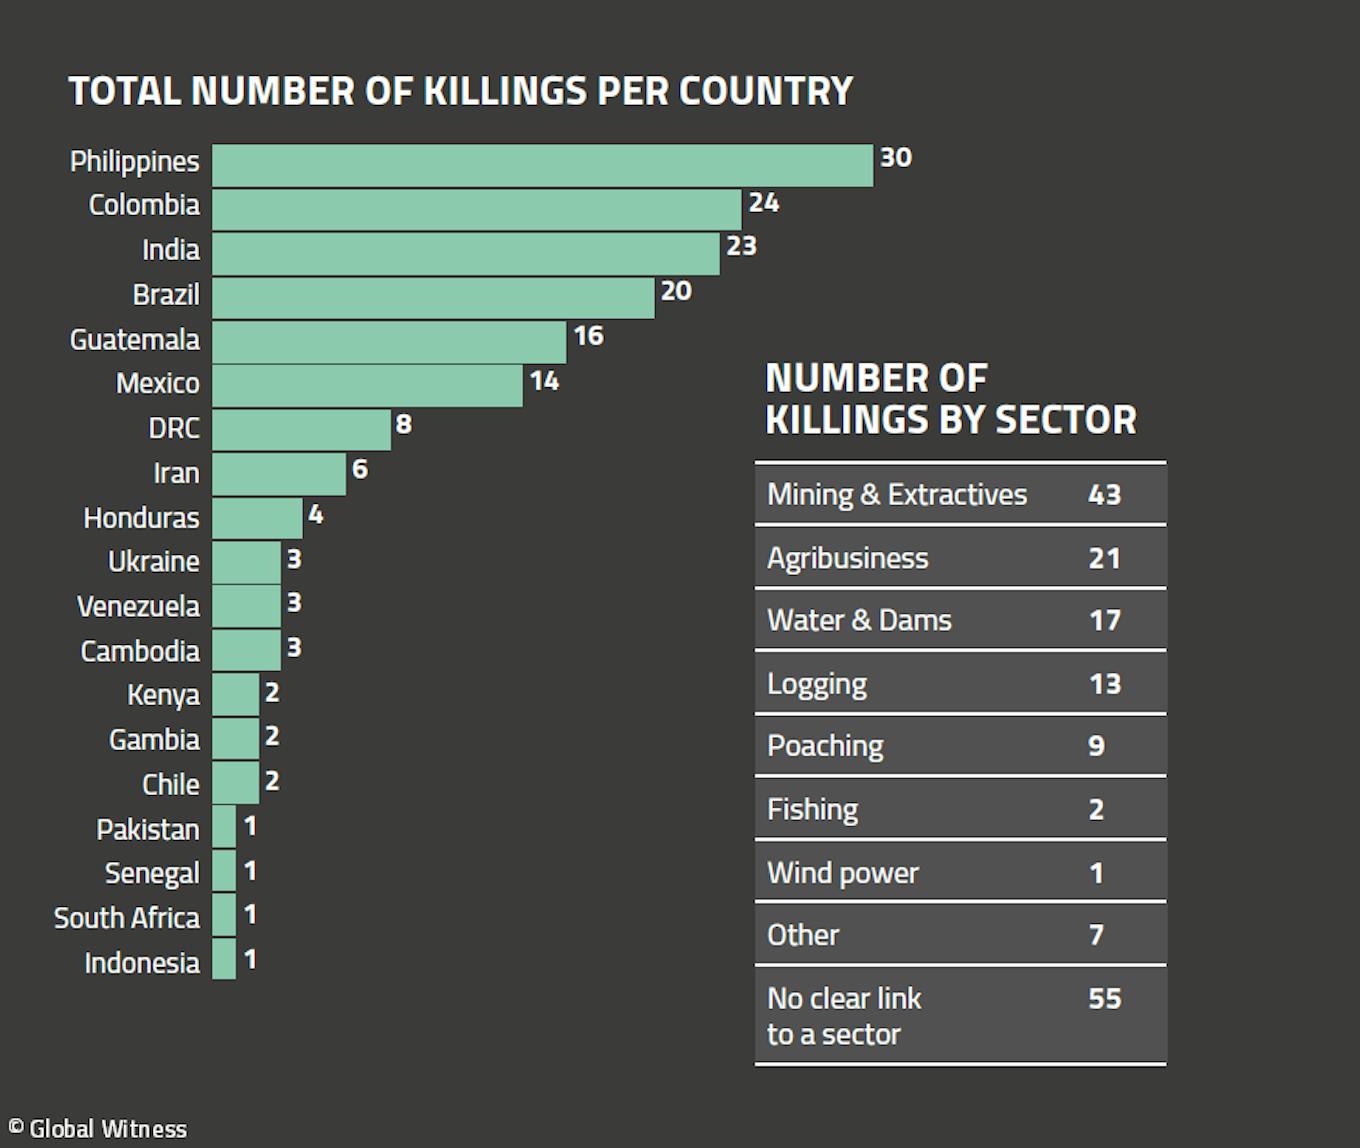 Number of environment and land rights defenders killed in 2018